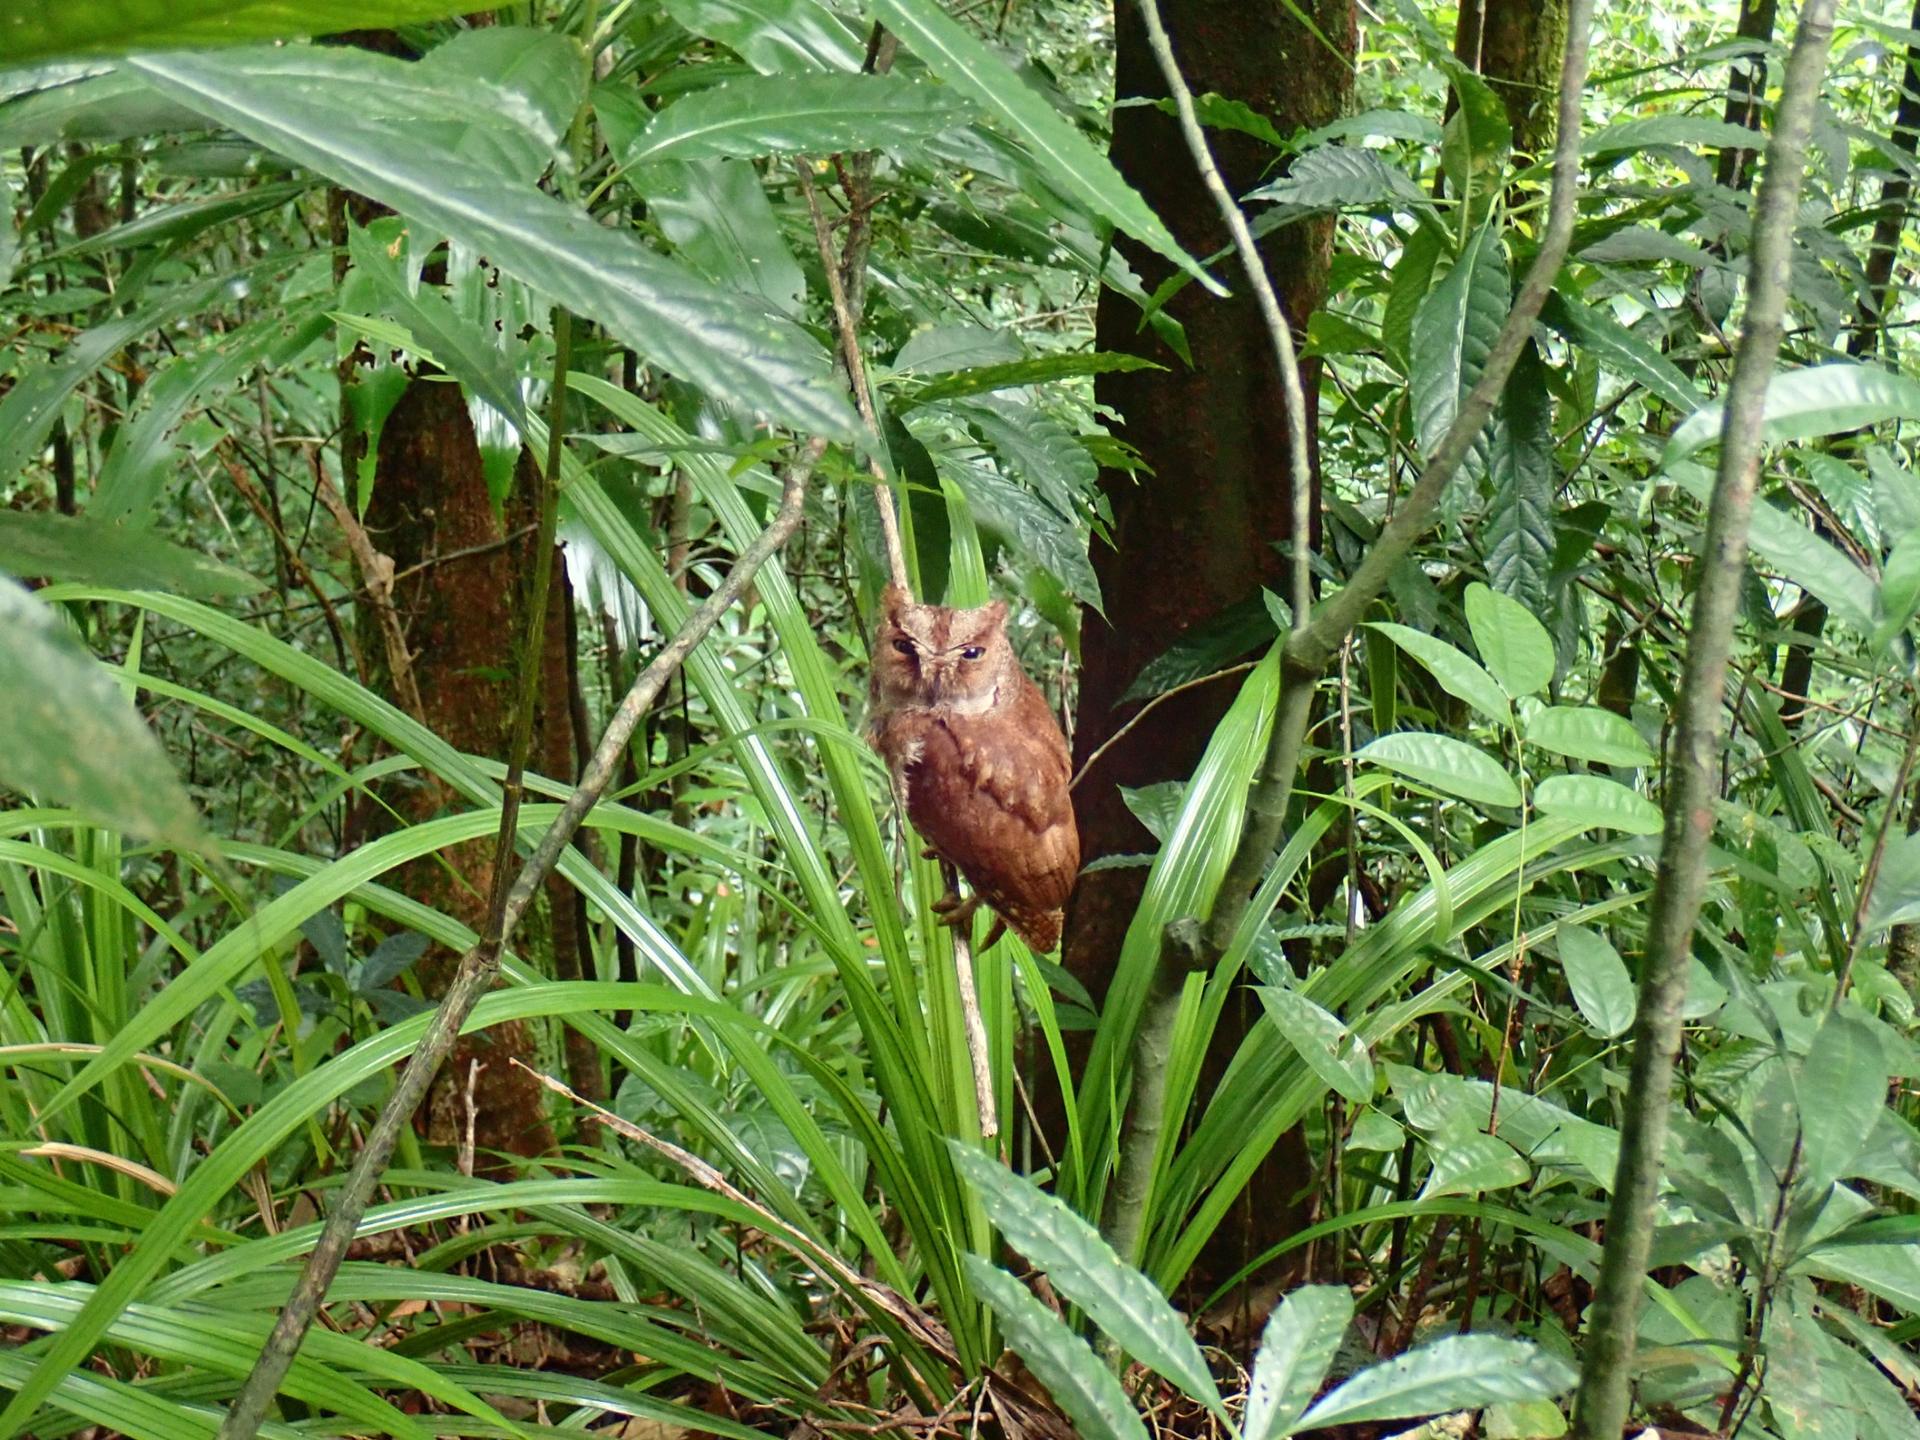 The Príncipe scops-owl was heard by locals, but eluded scientists for decades. It's now been described officially as its own unique species.